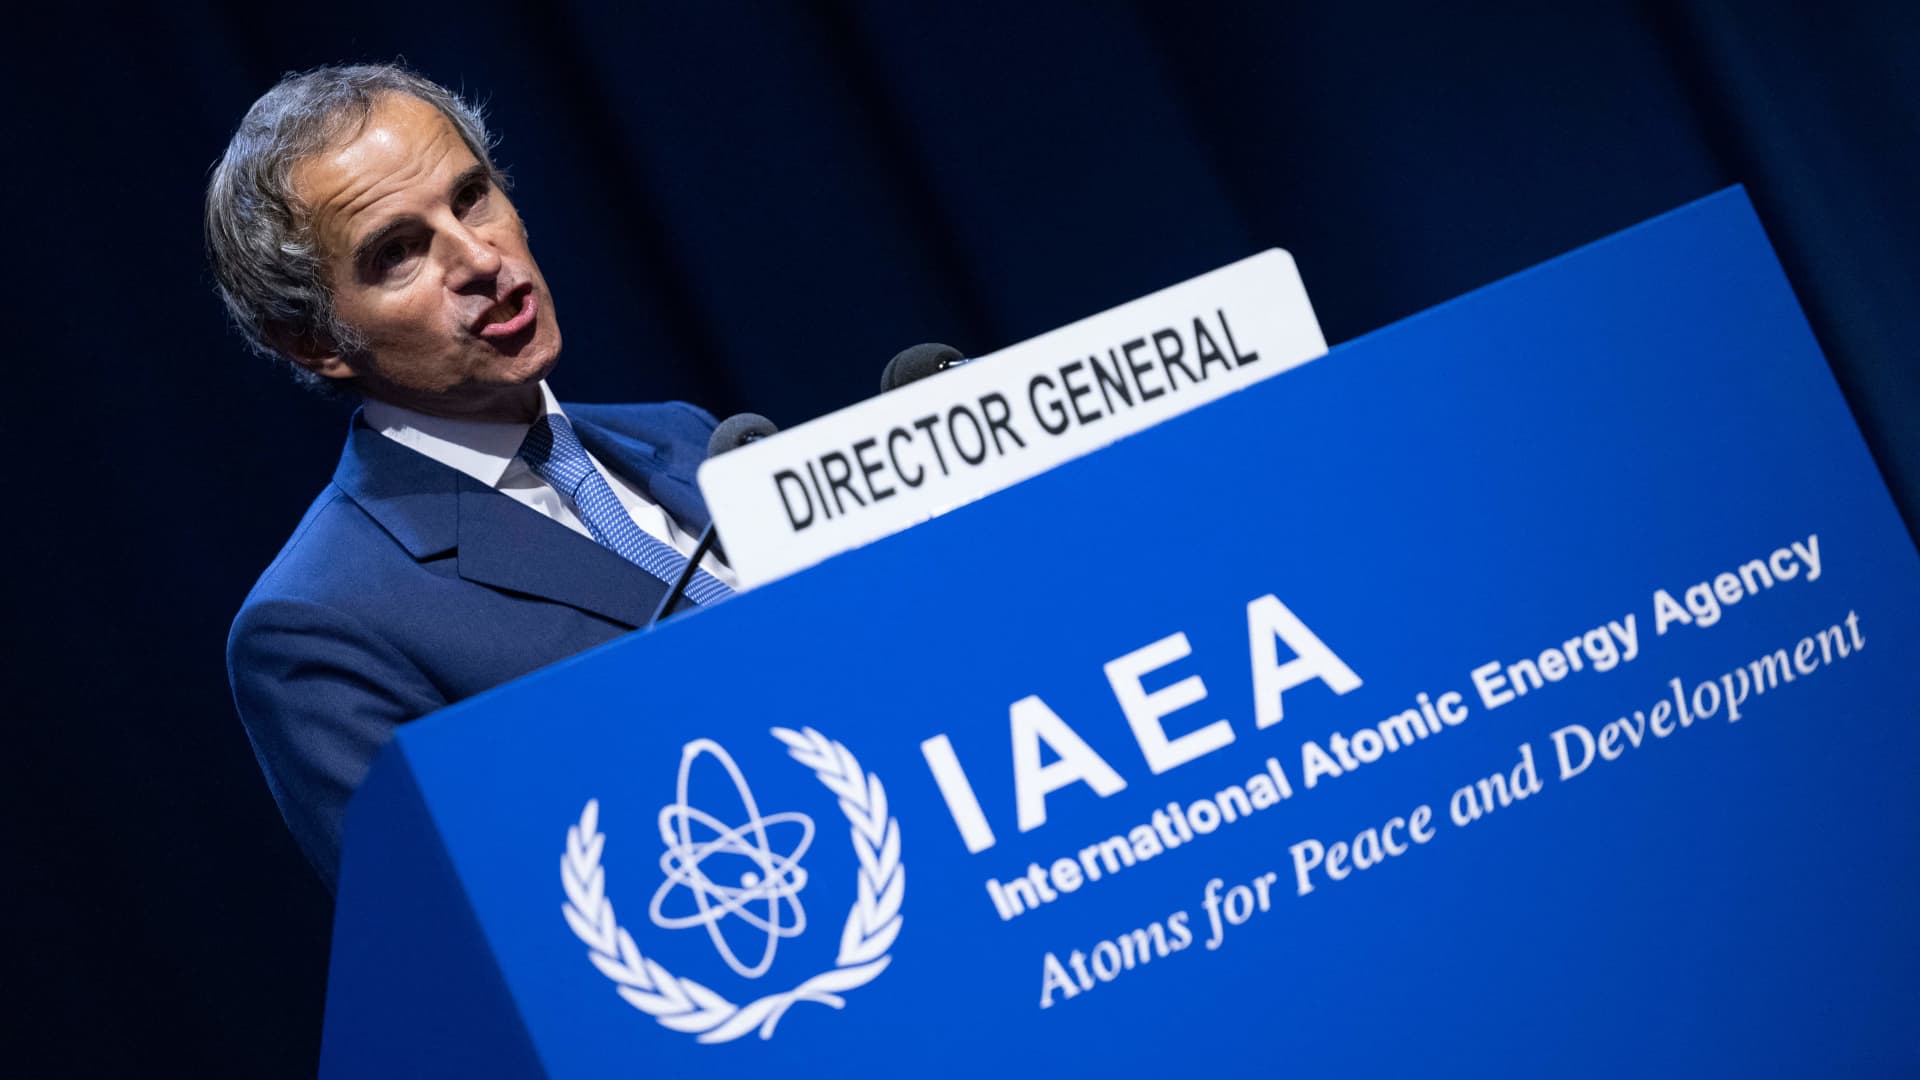 Rafael Grossi, Director General of the International Atomic Energy Agency (IAEA), speaks during the IAEA's General Conference at the agency's headquarters in Vienna, Austria on September 26, 2022.